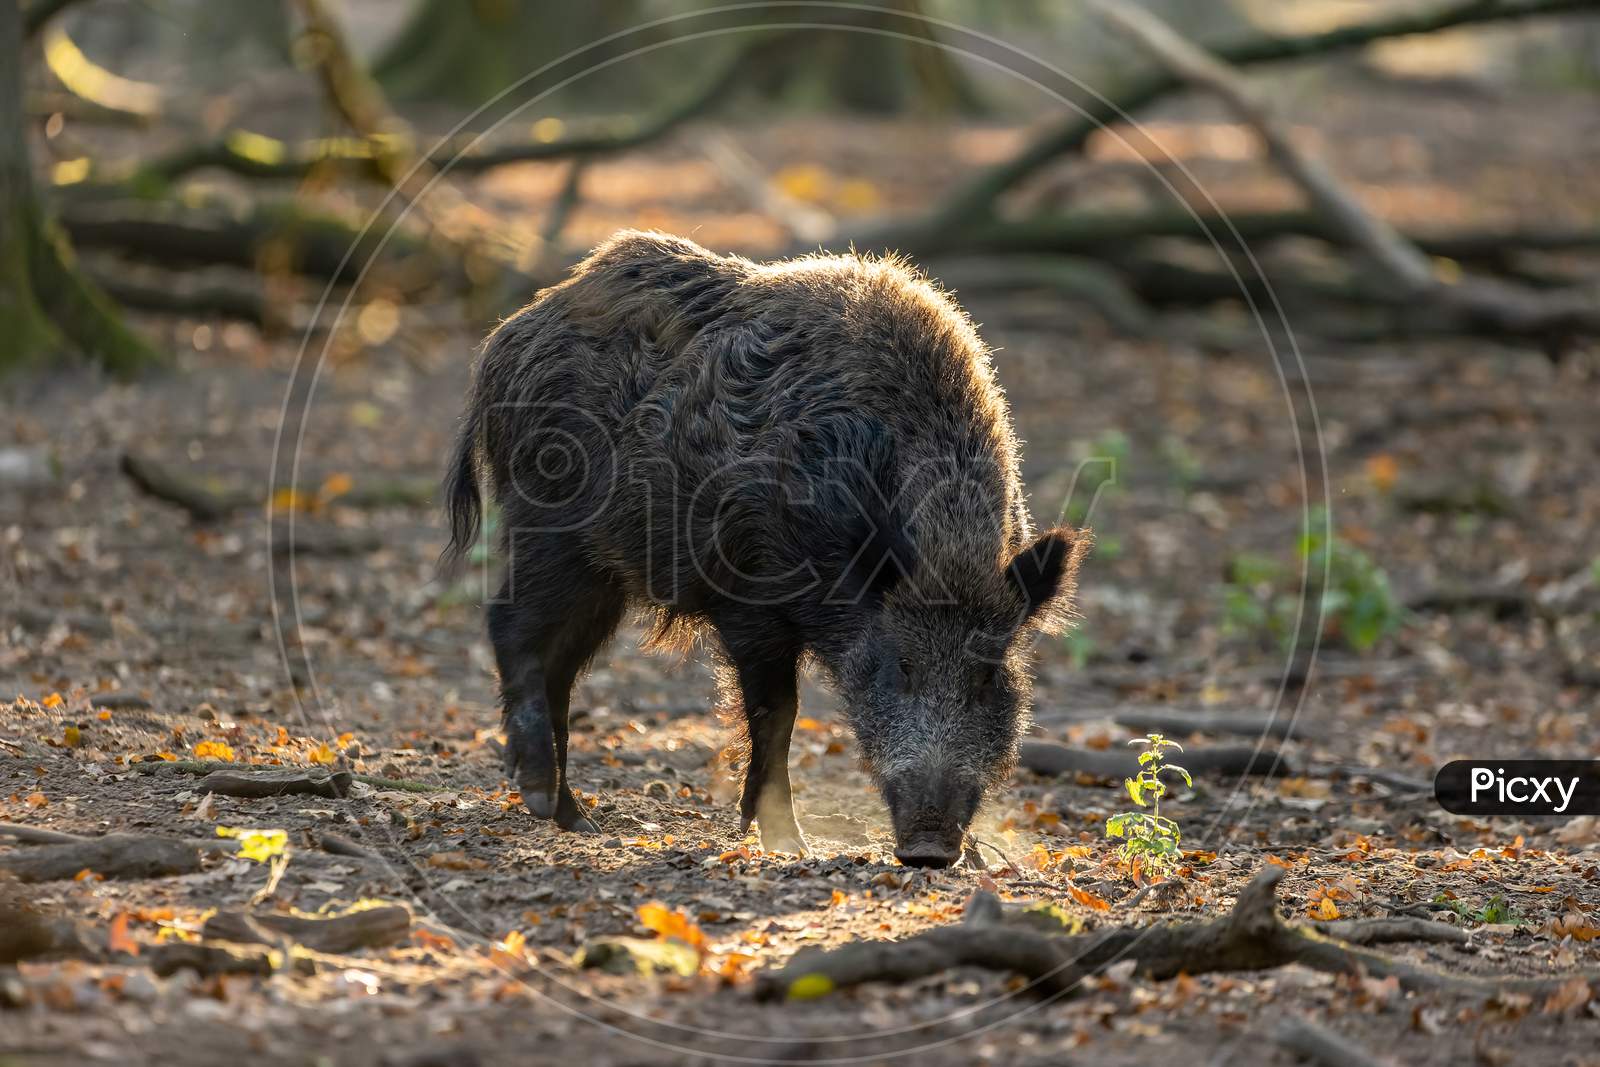 A wild boar walking through a forest in Hesse, Germany at a sunny day in autumn.